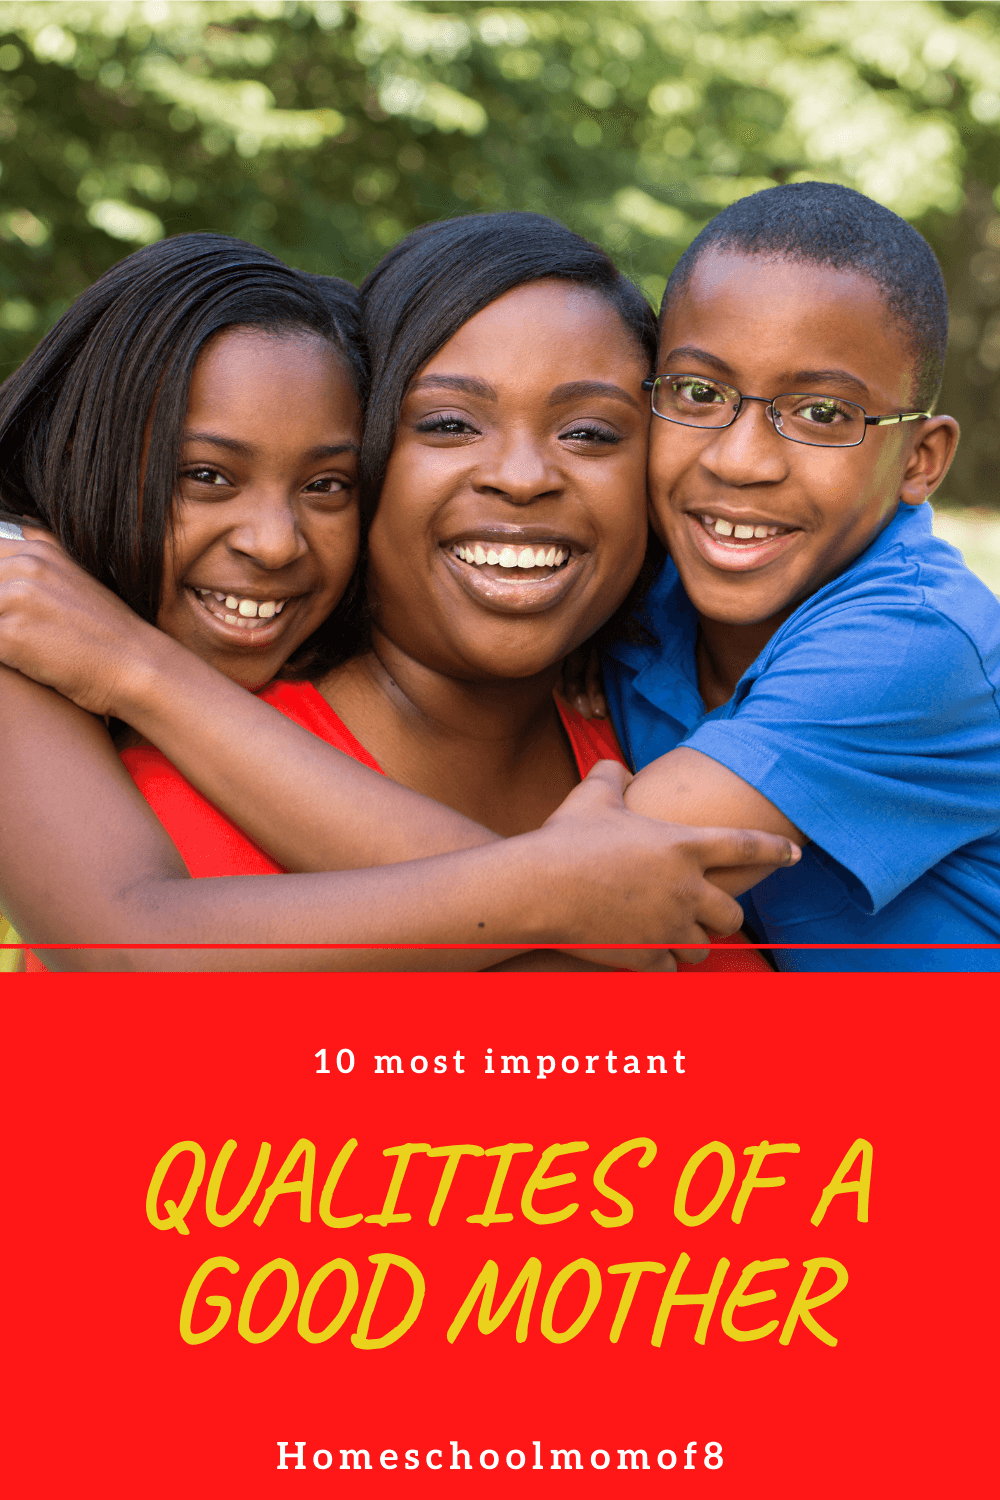 qualities of a good mother essay